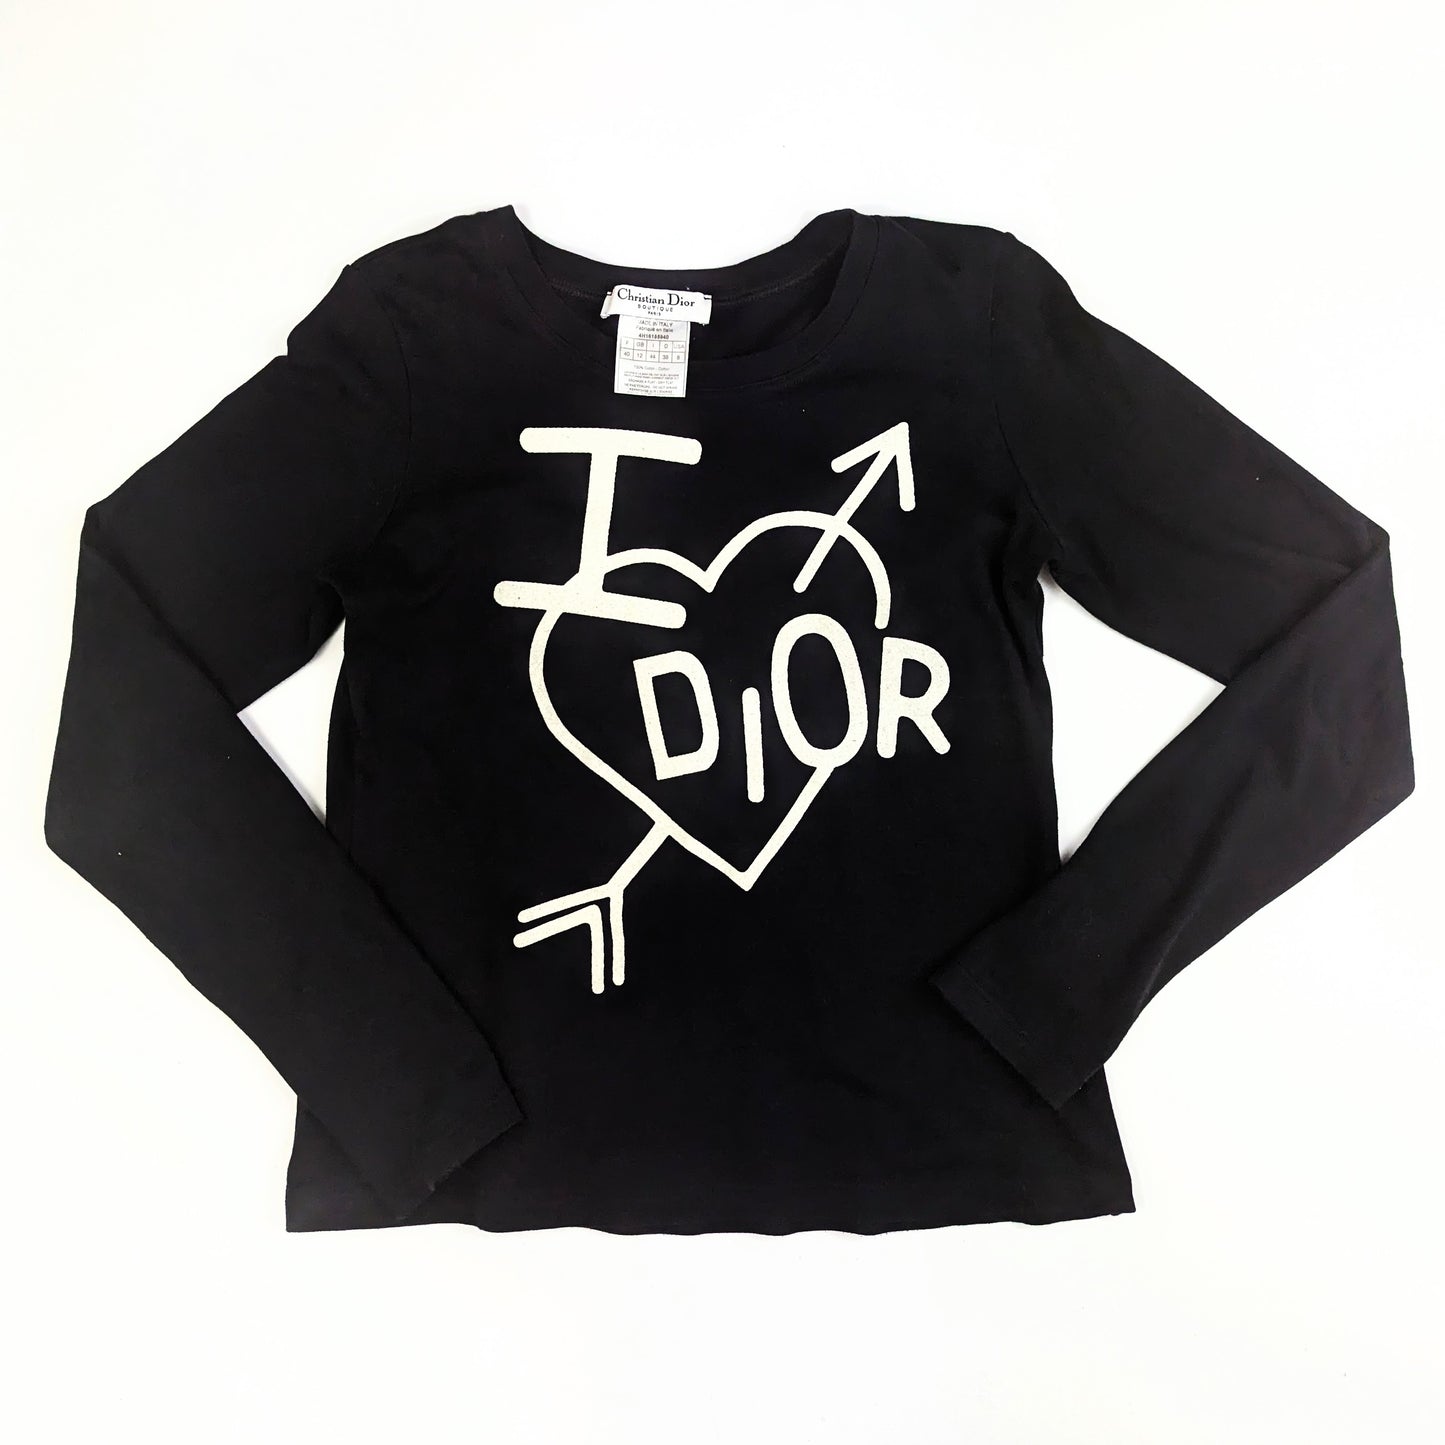 Dior "I Love Dior" long sleeve t-shirt by Galliano - S/S2003 - L